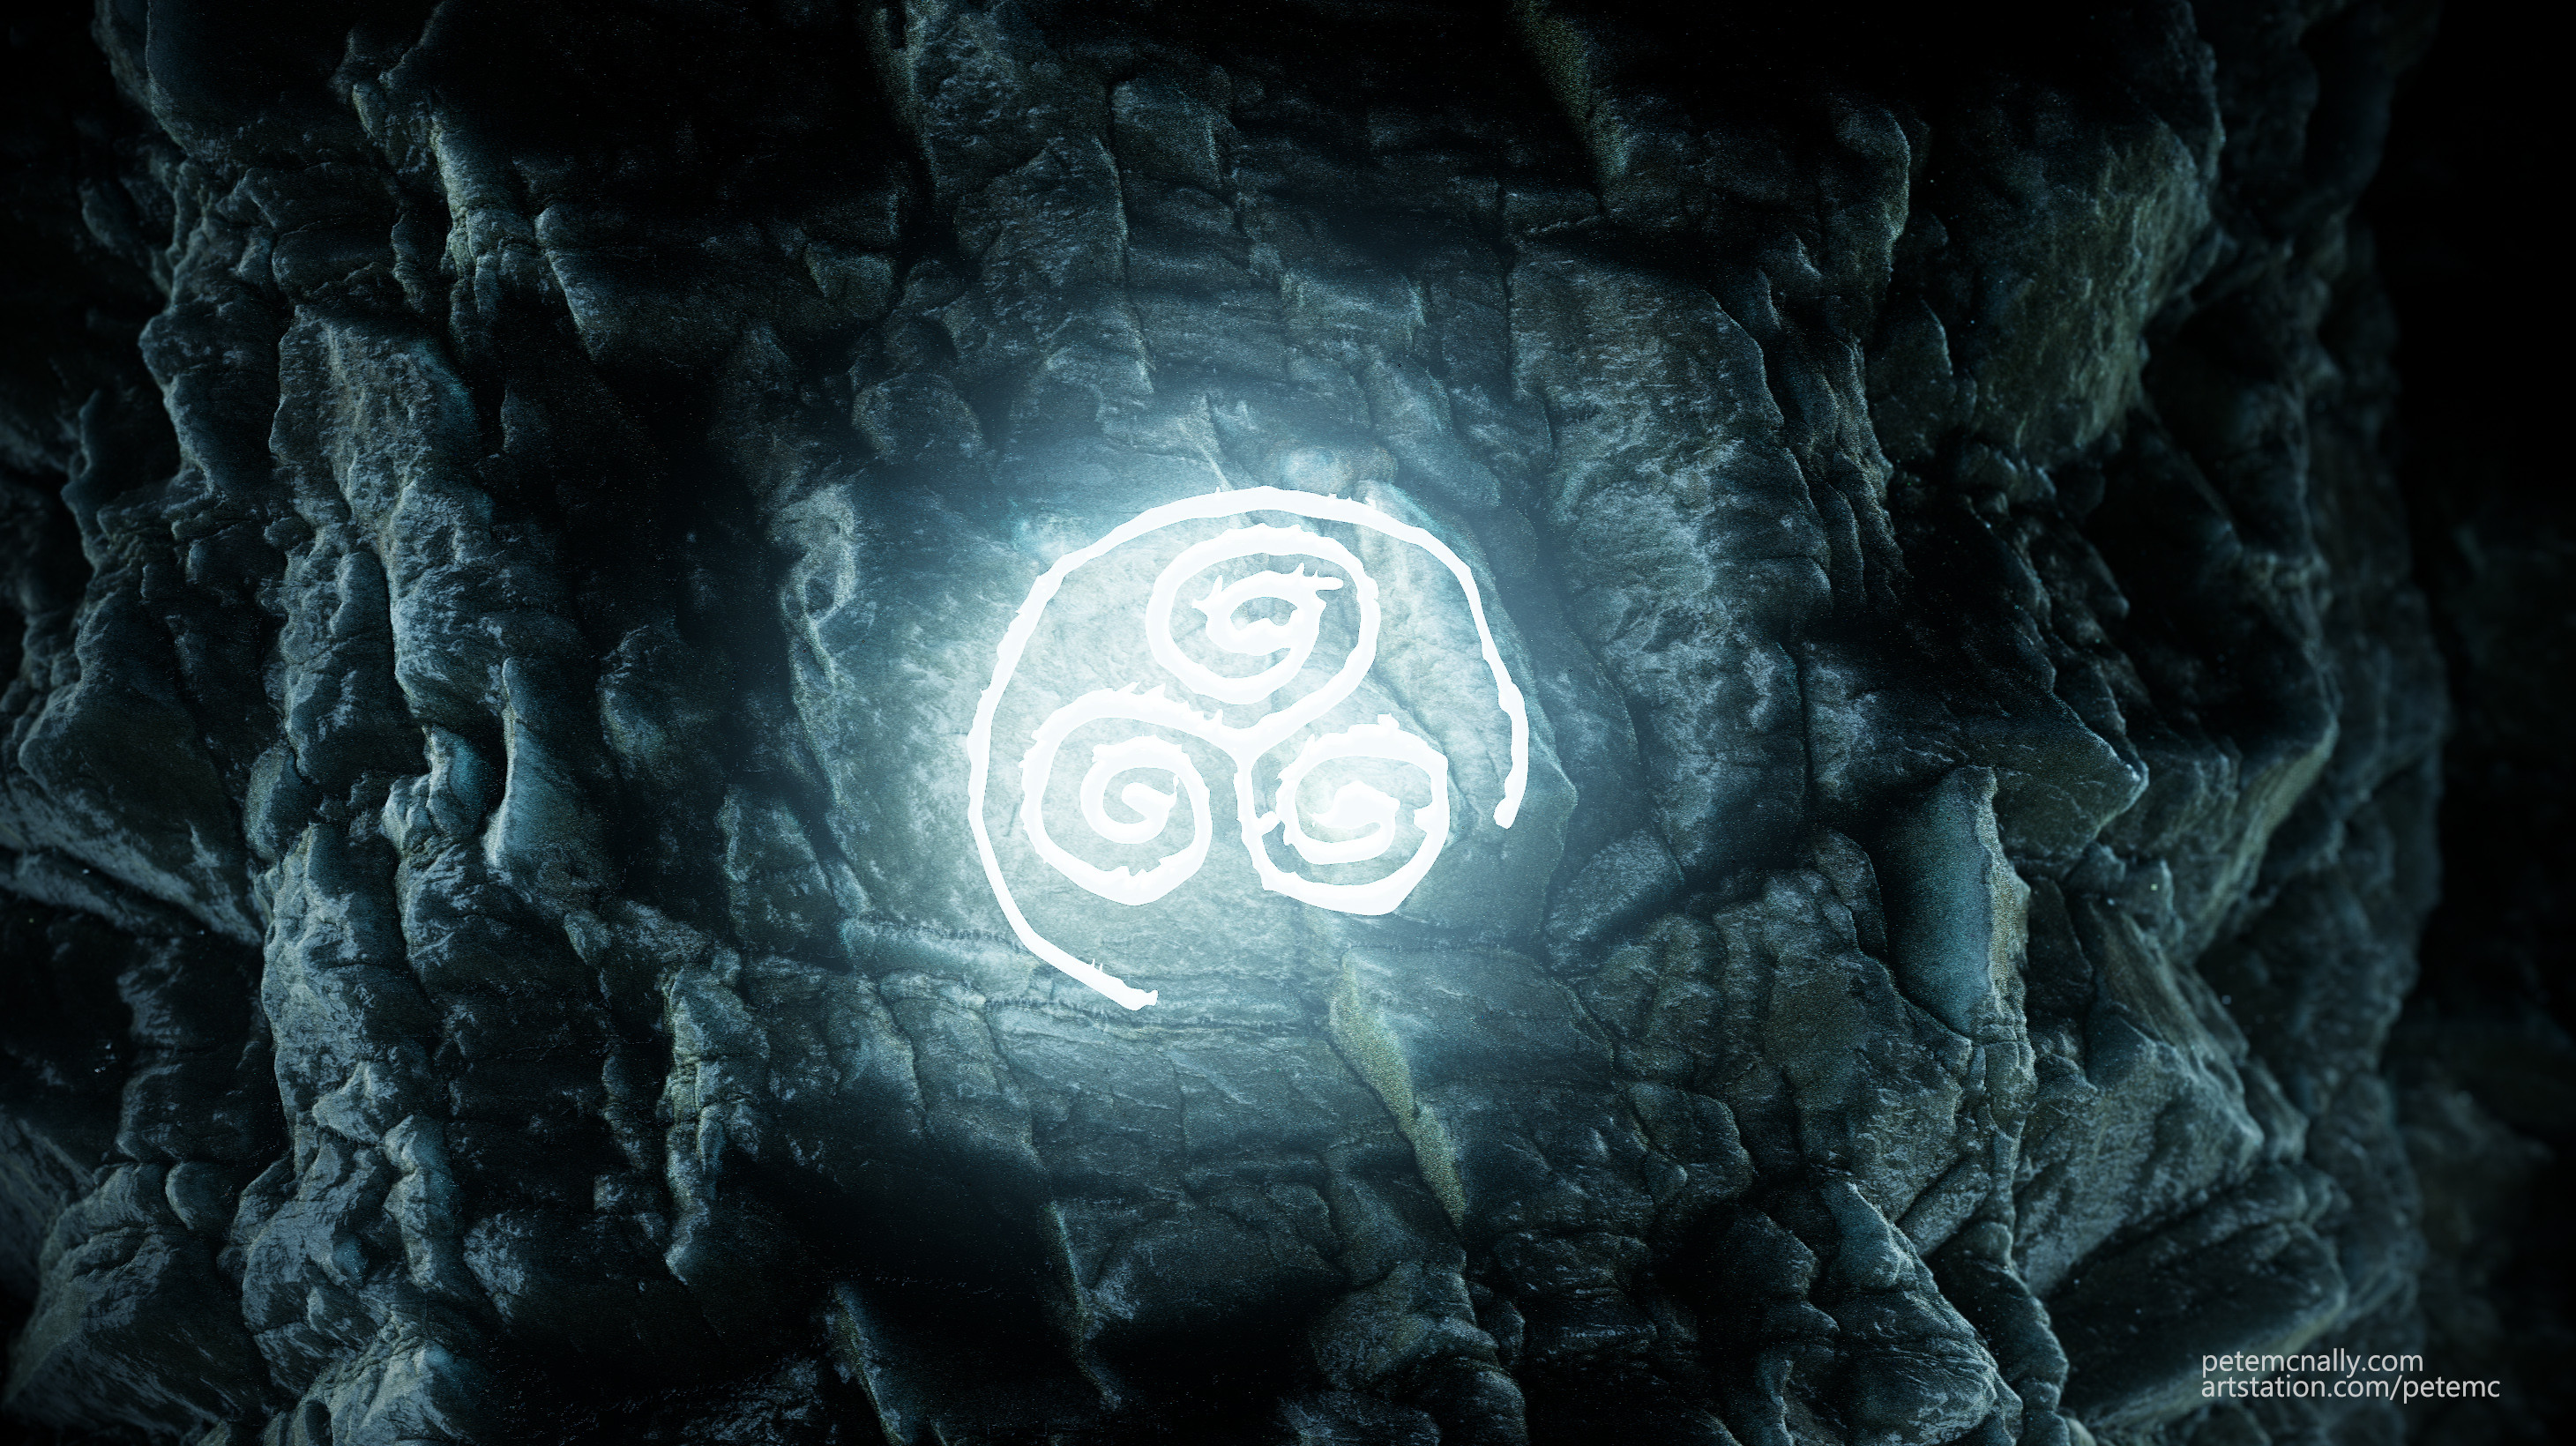 Referred to by many as a Triskelion, the triple spiral's earliest creation dates back to the Neolithic era, as it can be seen at the entrance of Newgrange, Ireland.